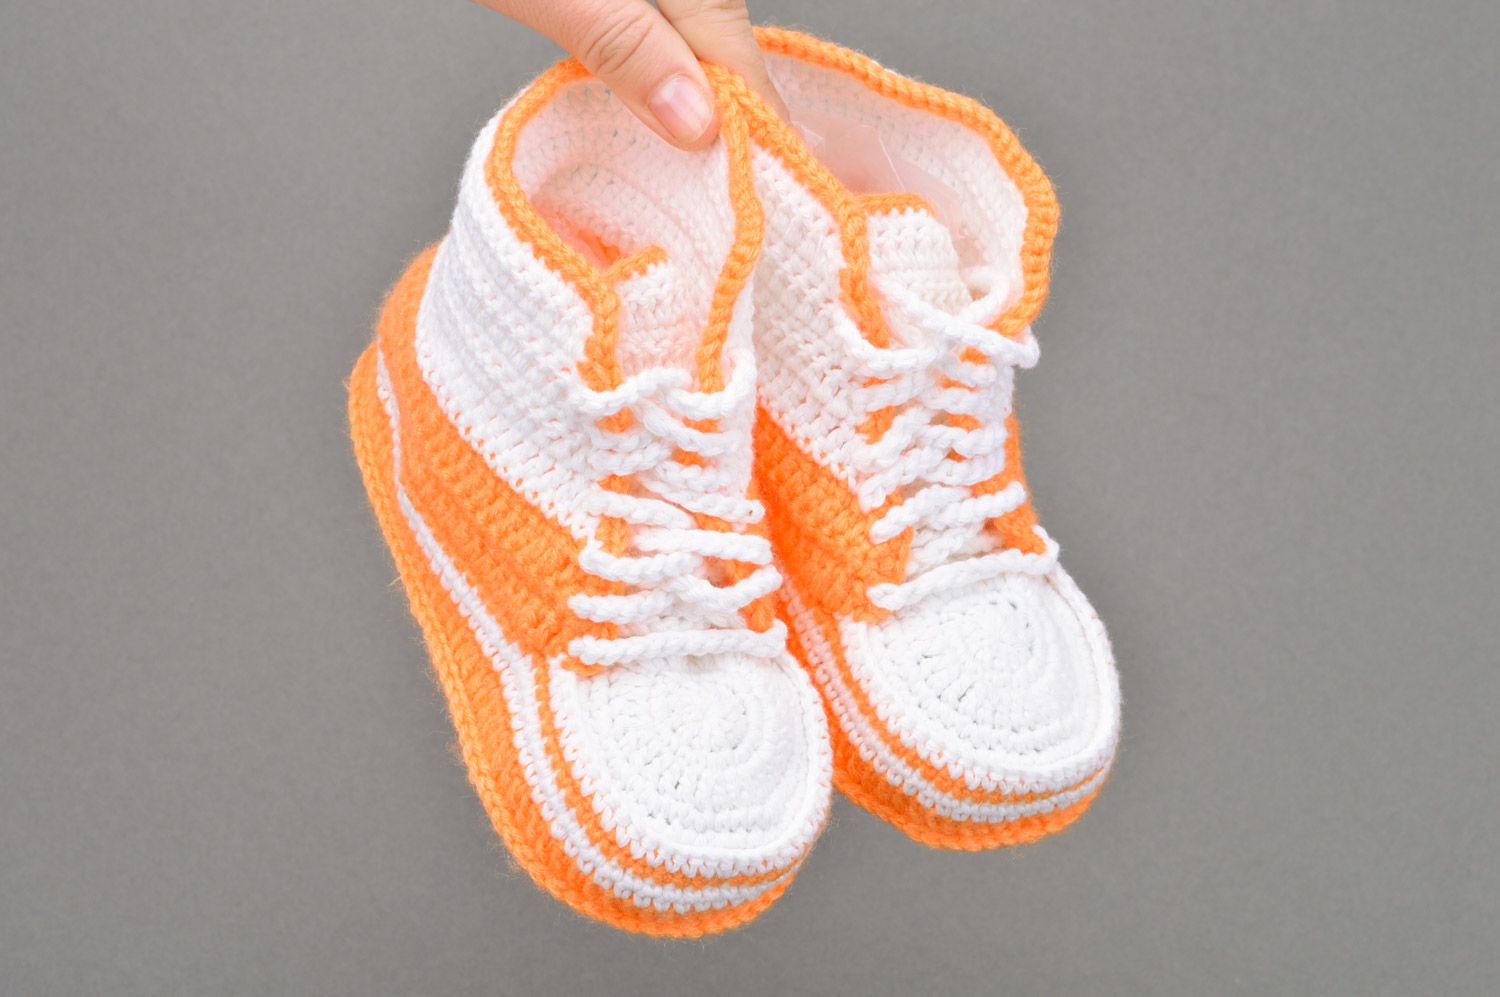 Handmade crocheted small orange and white baby shoes with shoelaces photo 3